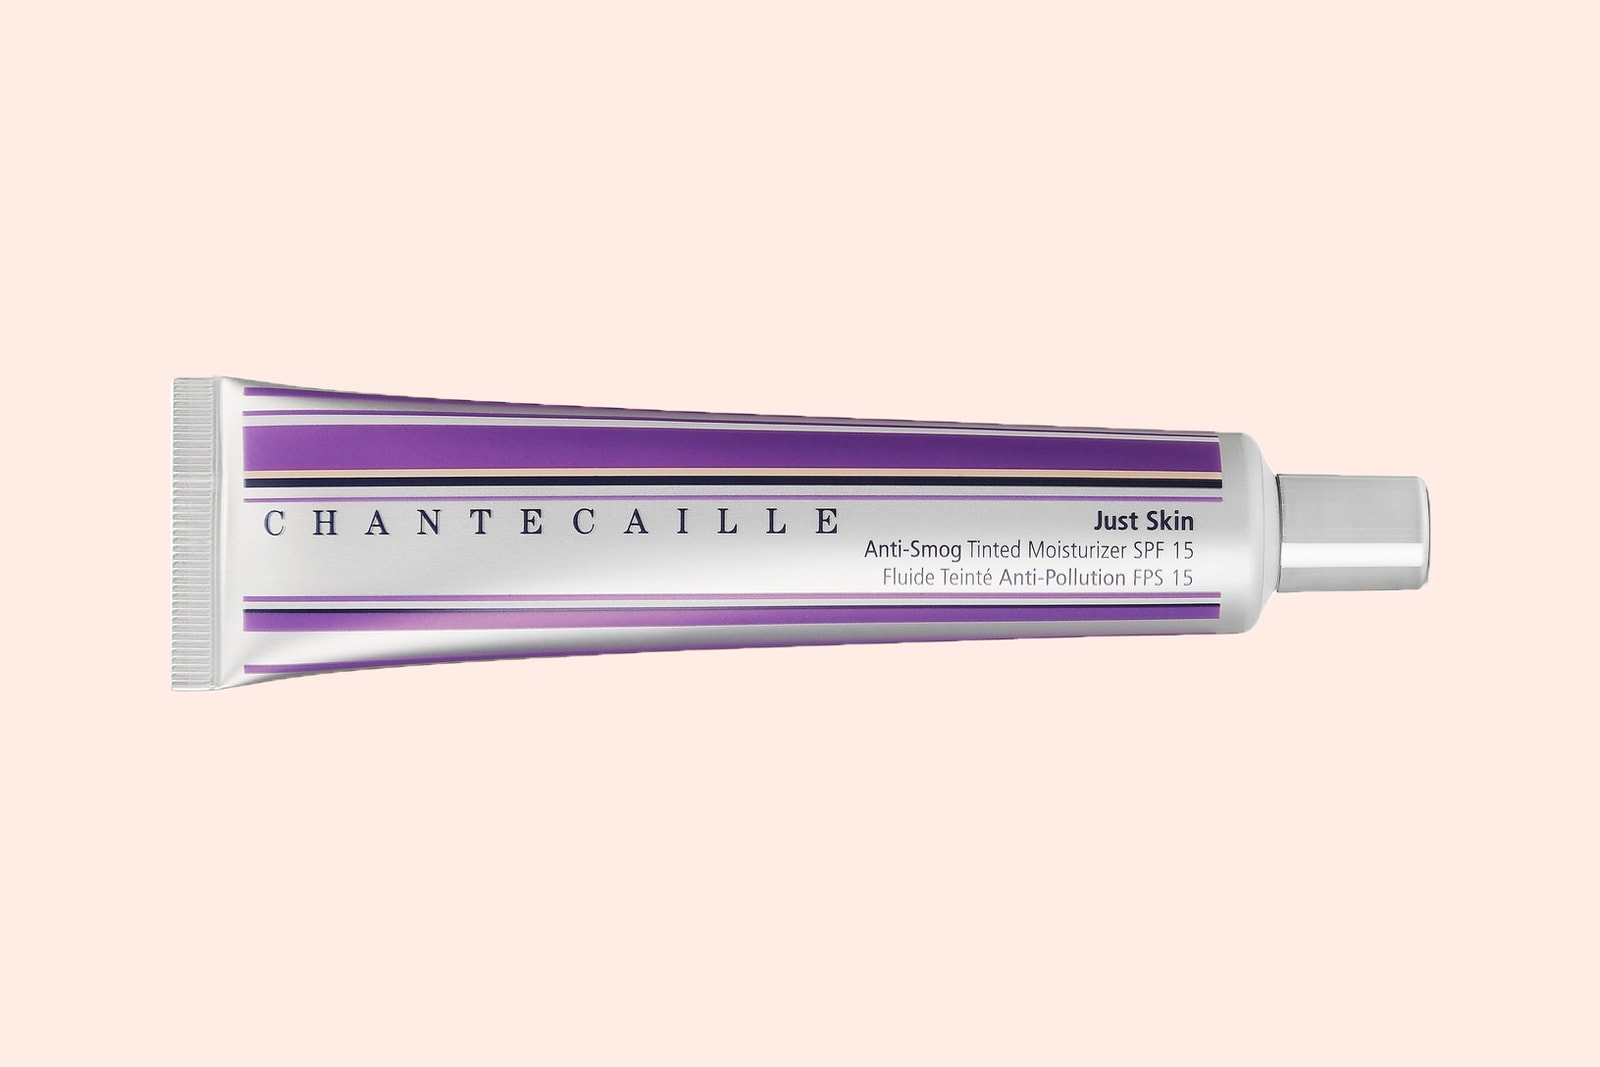 chantecaille just skin tinted moisturizer review makeup spf cruelty free anti pollution